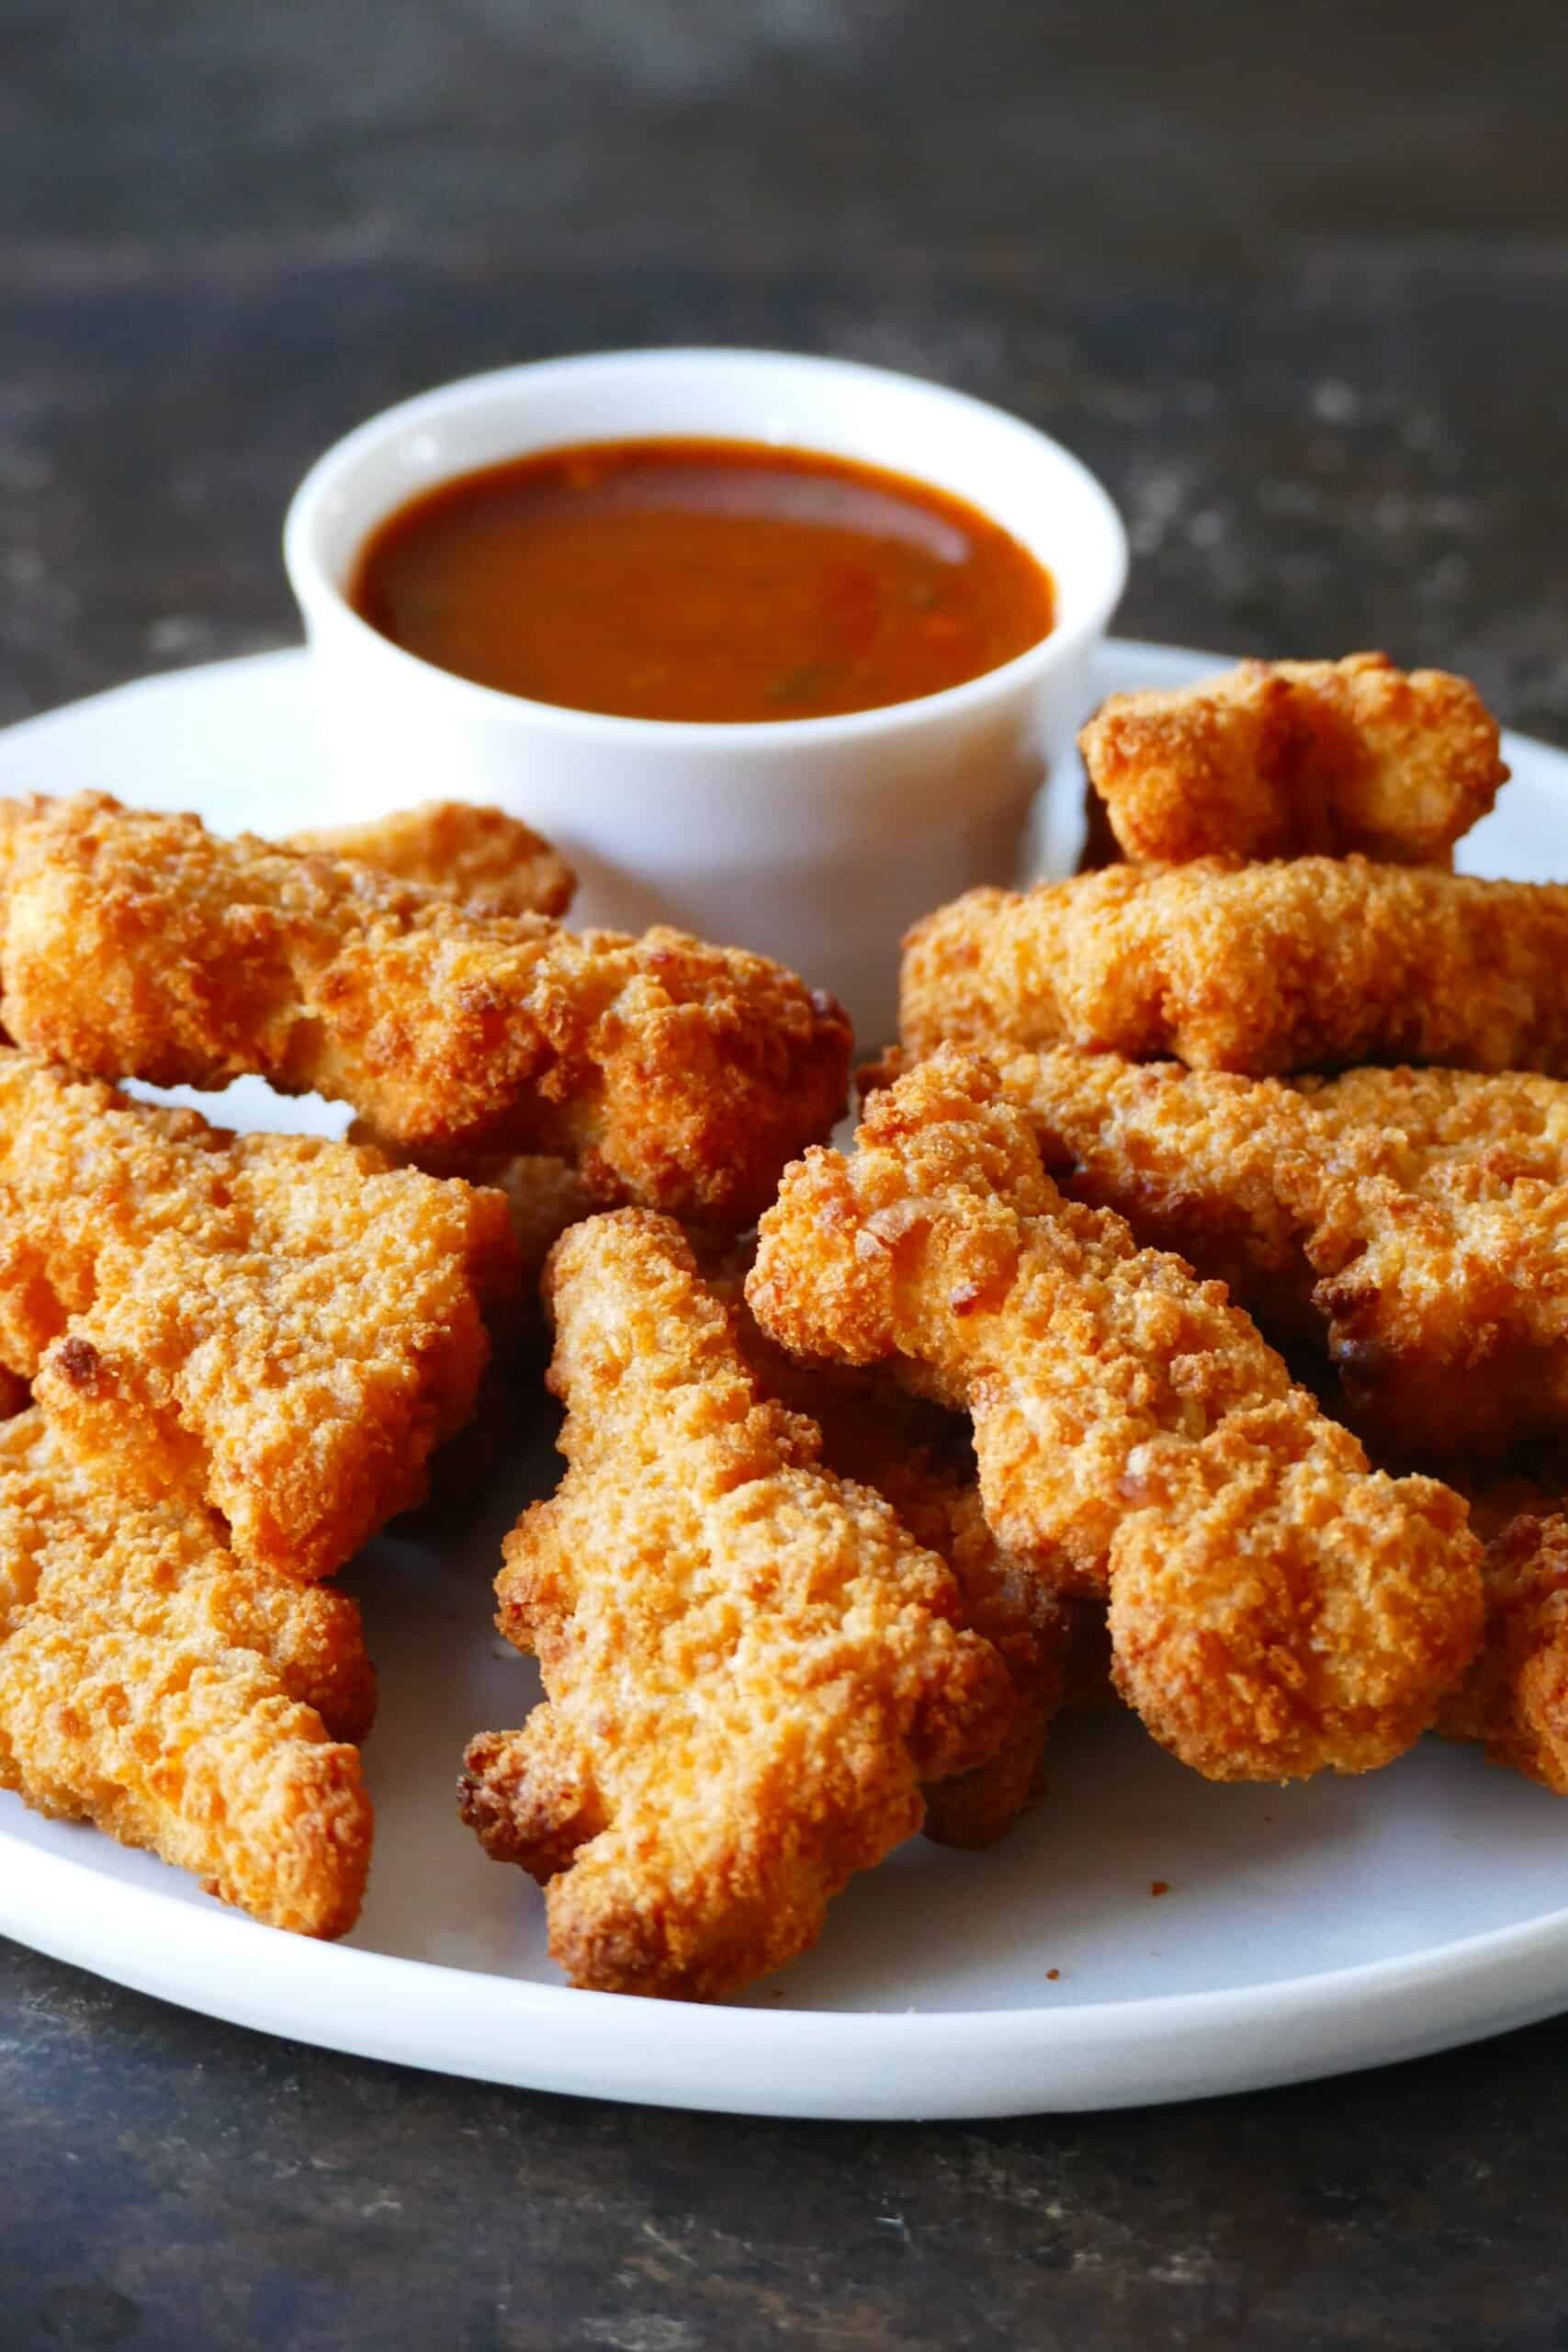 White plate with crispy golden chicken nuggets with red sauce in white bowl